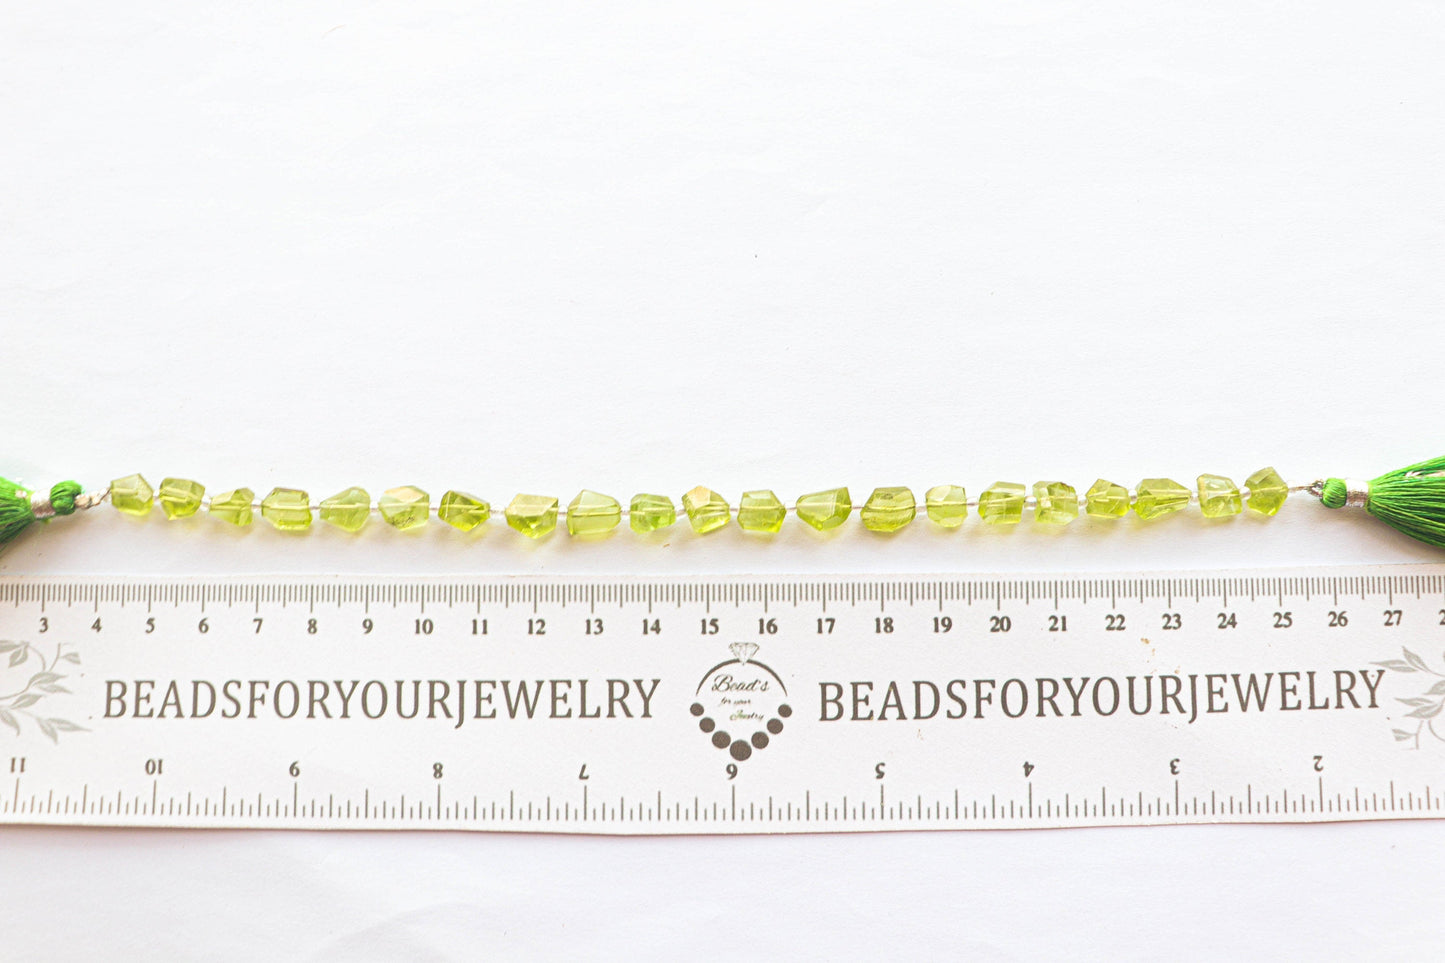 Peridot Faceted beads Uneven Shape | 6x8mm to 7x9mm | 8 inch Full String | Natural Gemstone | Beadsforyourjewellery | Rare Gemstone Beads Beadsforyourjewelry